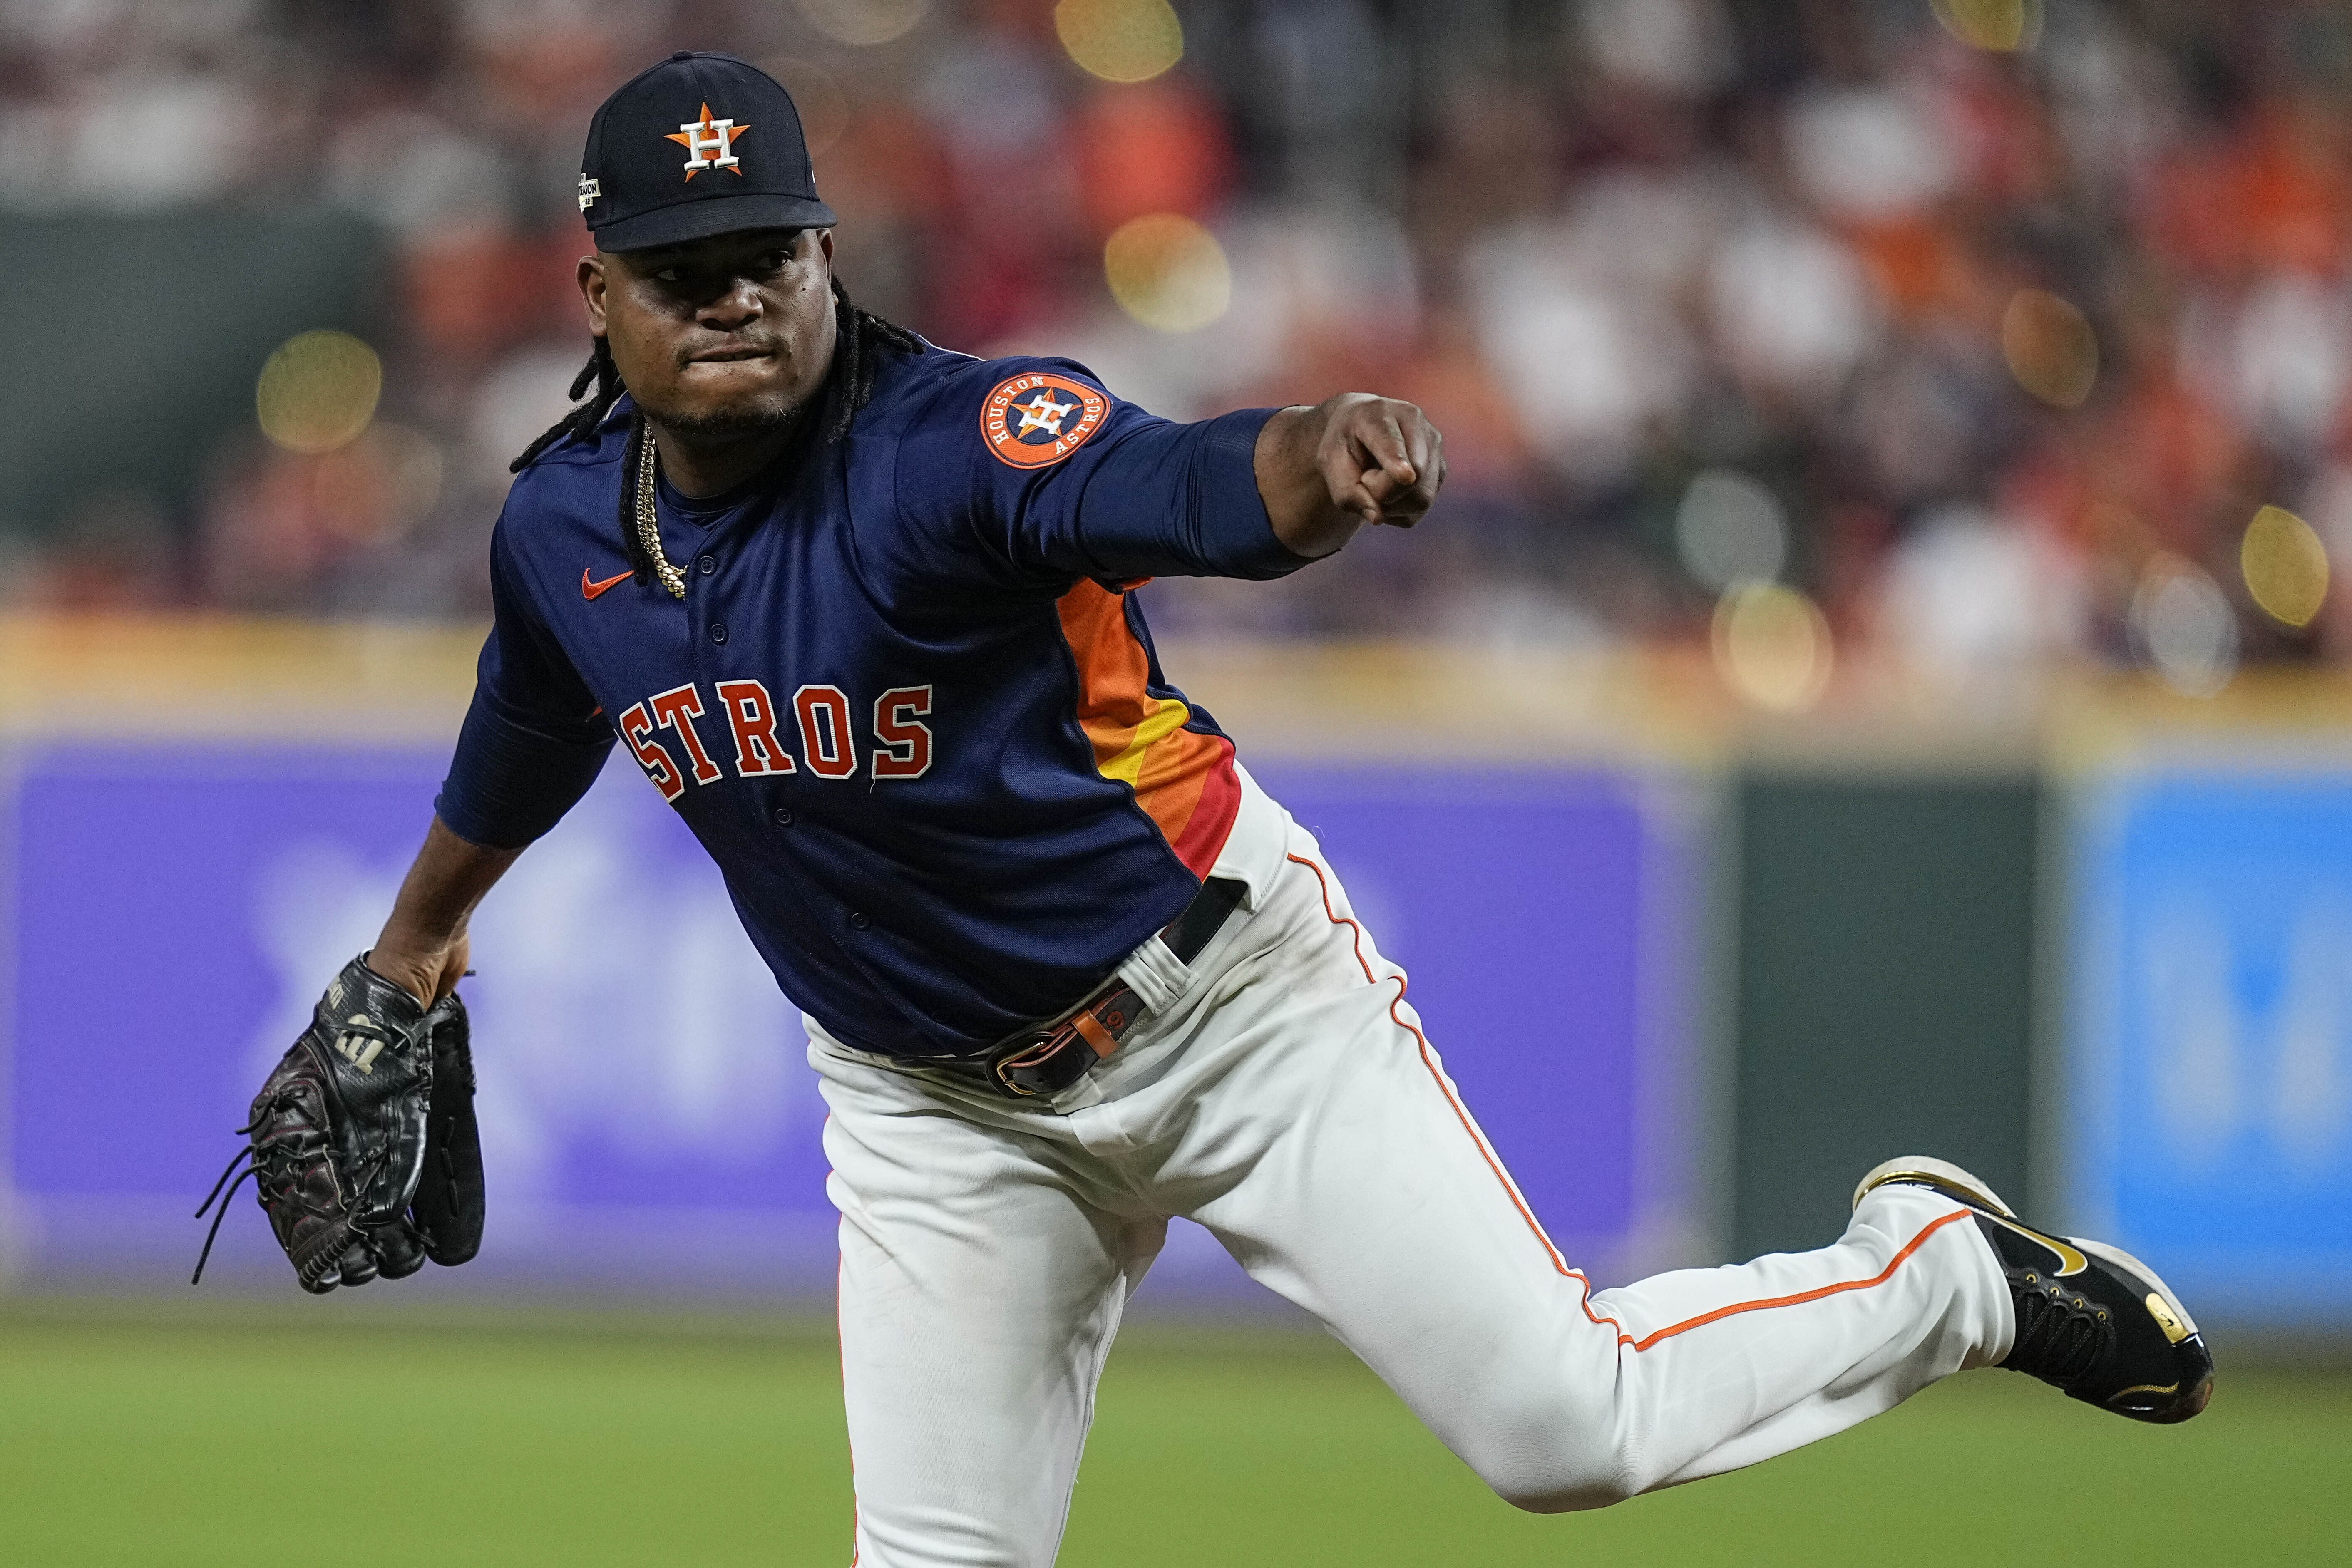 Phillies on Astros pitcher Framber Valdez, and how a sticky